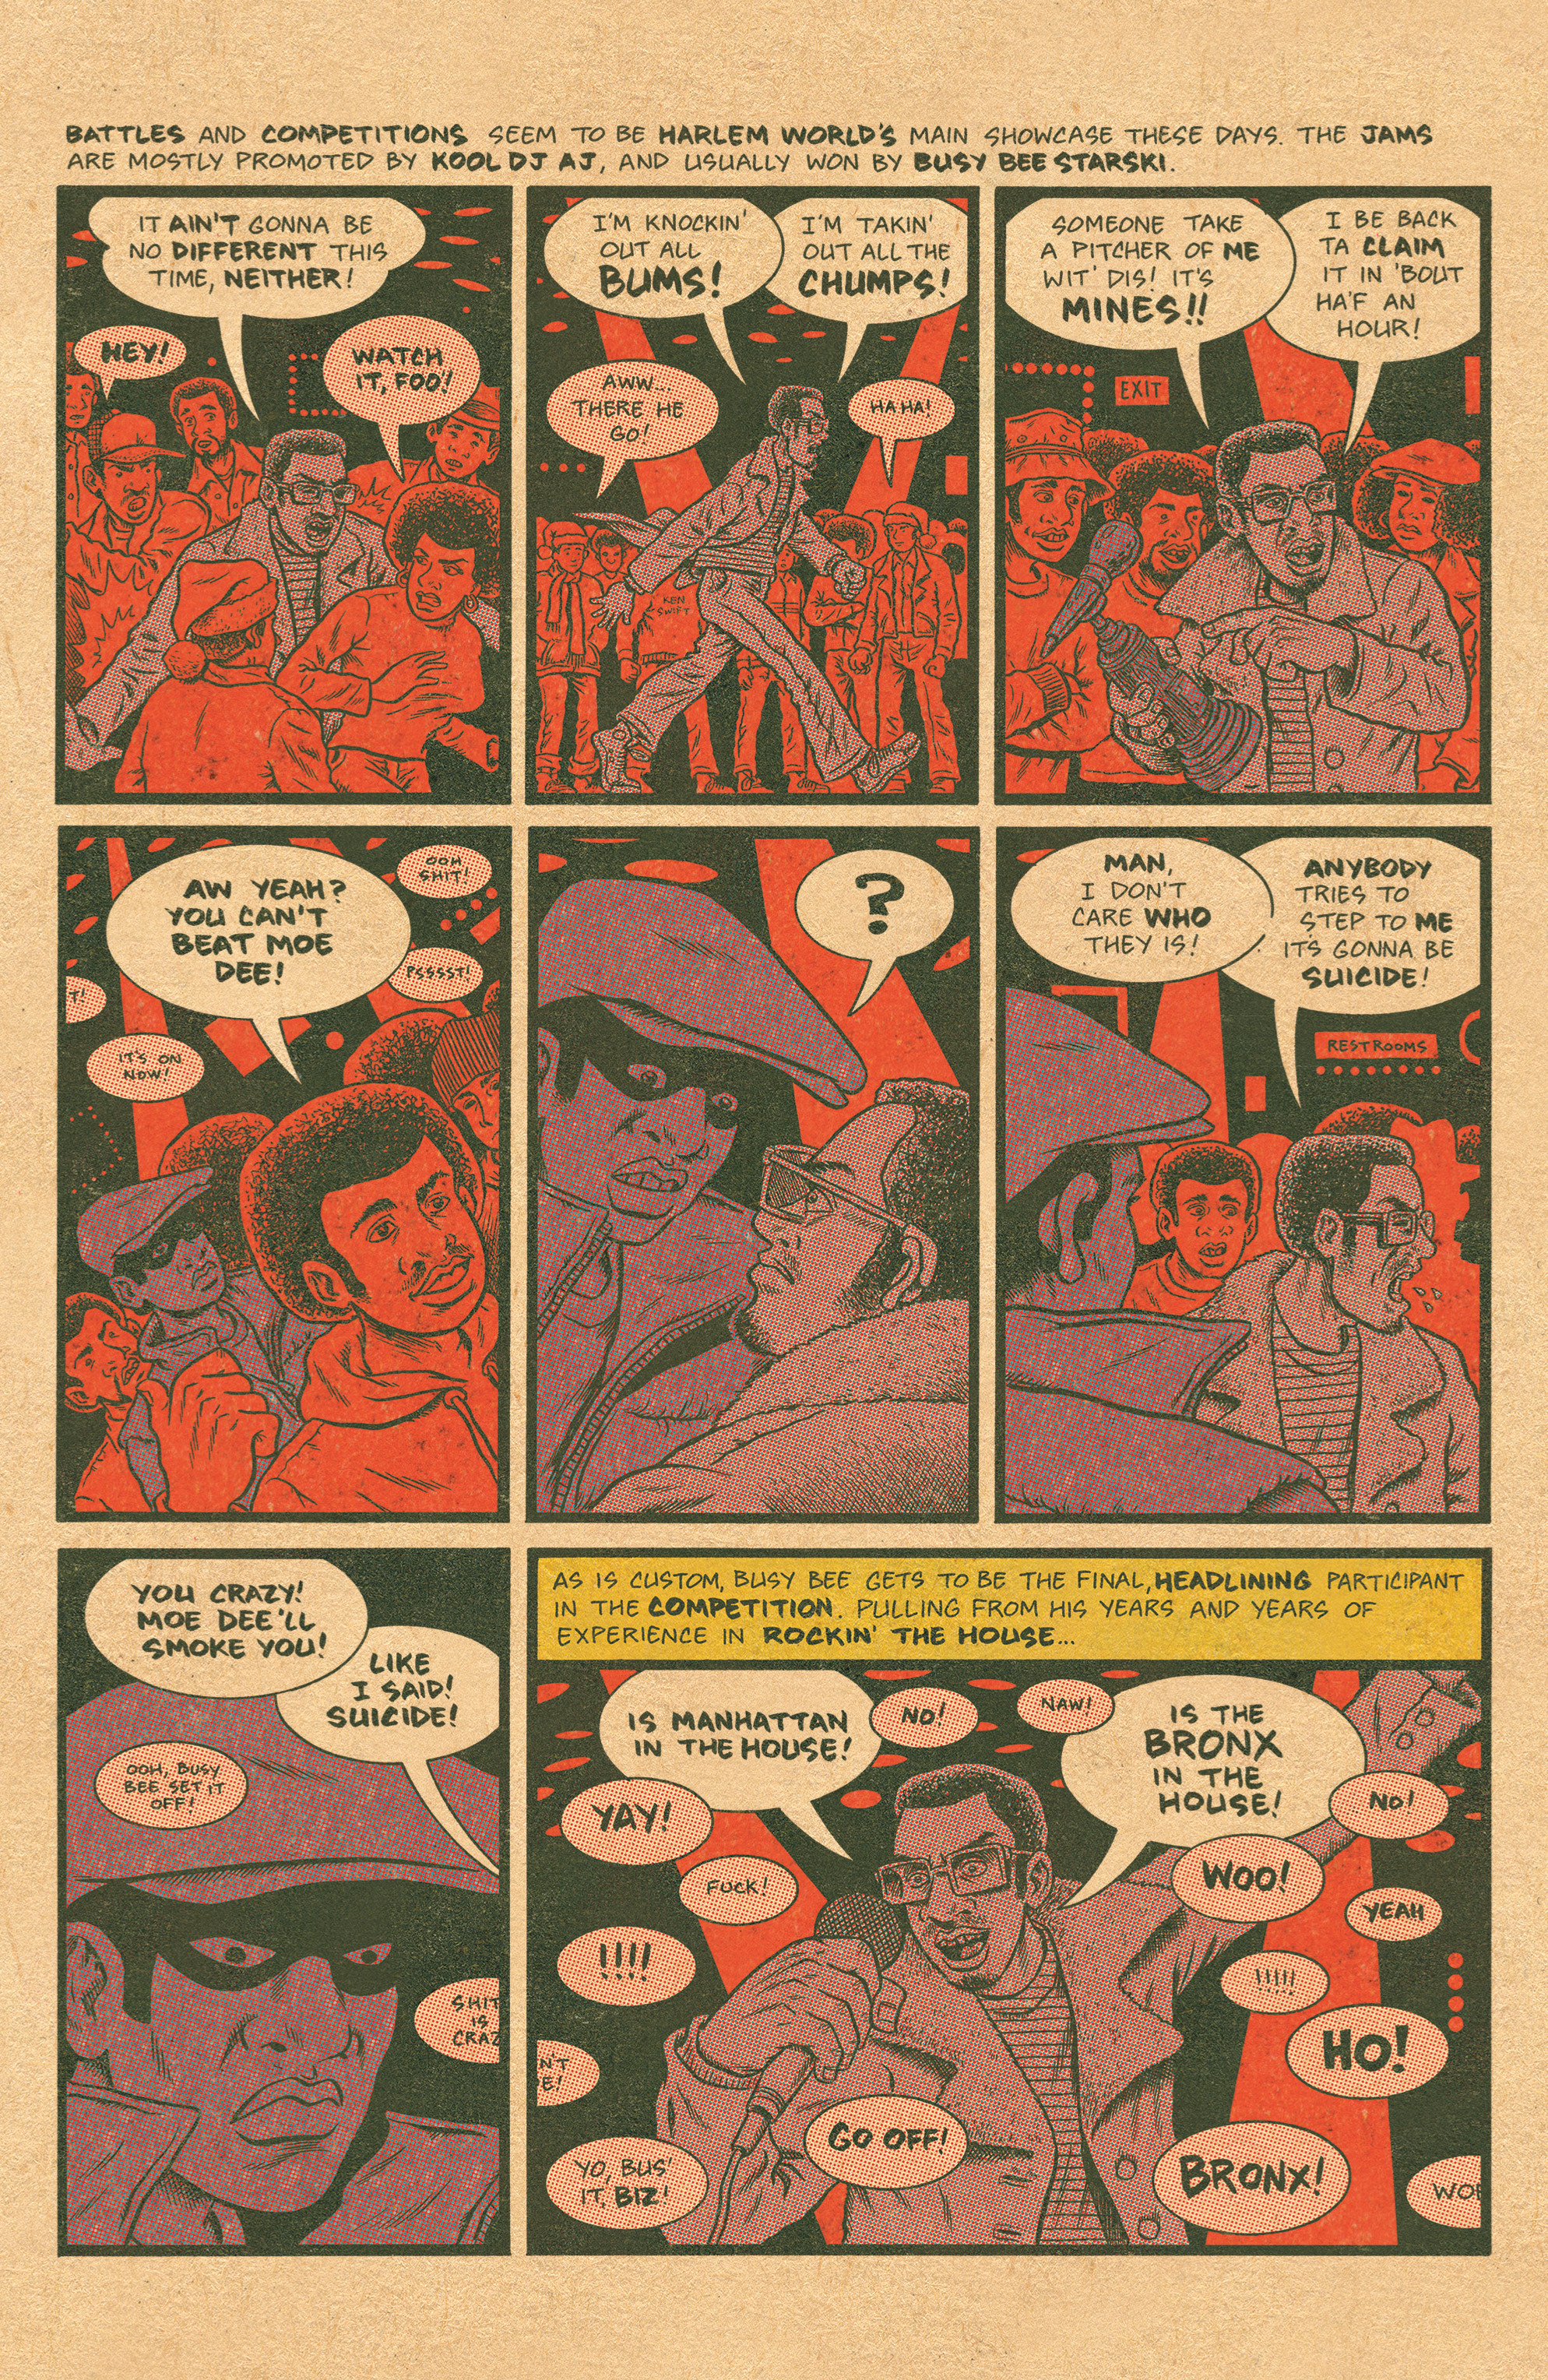 Read online Free Comic Book Day 2015 comic -  Issue # Hip Hop Family Tree Three-in-One - Featuring Cosplayers - 5